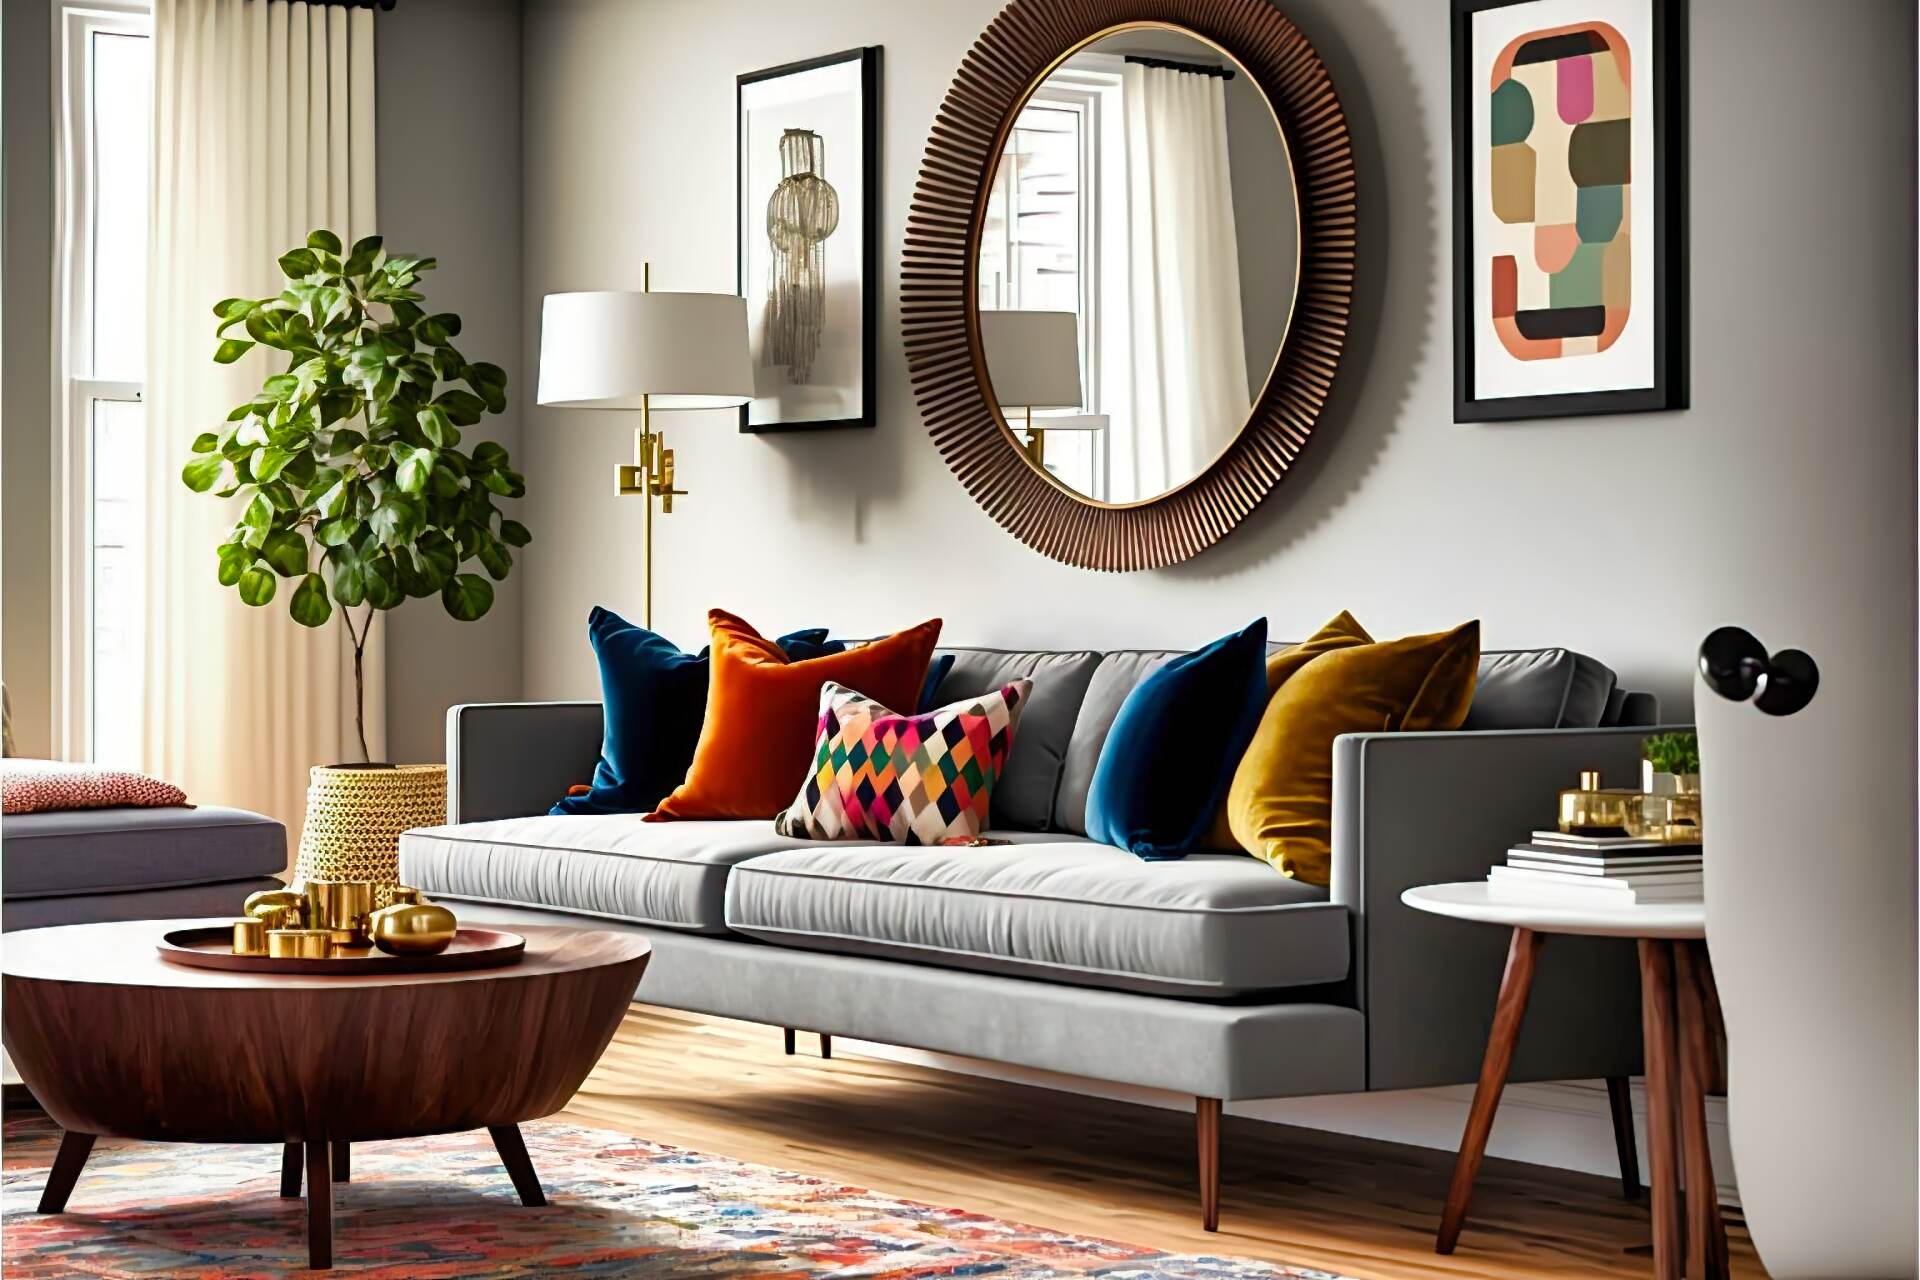 This Living Room Is Full Of Mid-Century Modern Style And Eclectic Art. The Sofa Is A Classic Grey Velvet, And There Is A Low-Slung Walnut Coffee Table. A Colorful Berber-Style Rug Adds Texture And A Vibrant Feel. A Round Mirror In A Wooden Frame Adds A Classic Mid-Century Modern Touch. There Are Several Pieces Of Art Hung On The Wall, Including A Vintage-Style Print And A Large Abstract Painting.